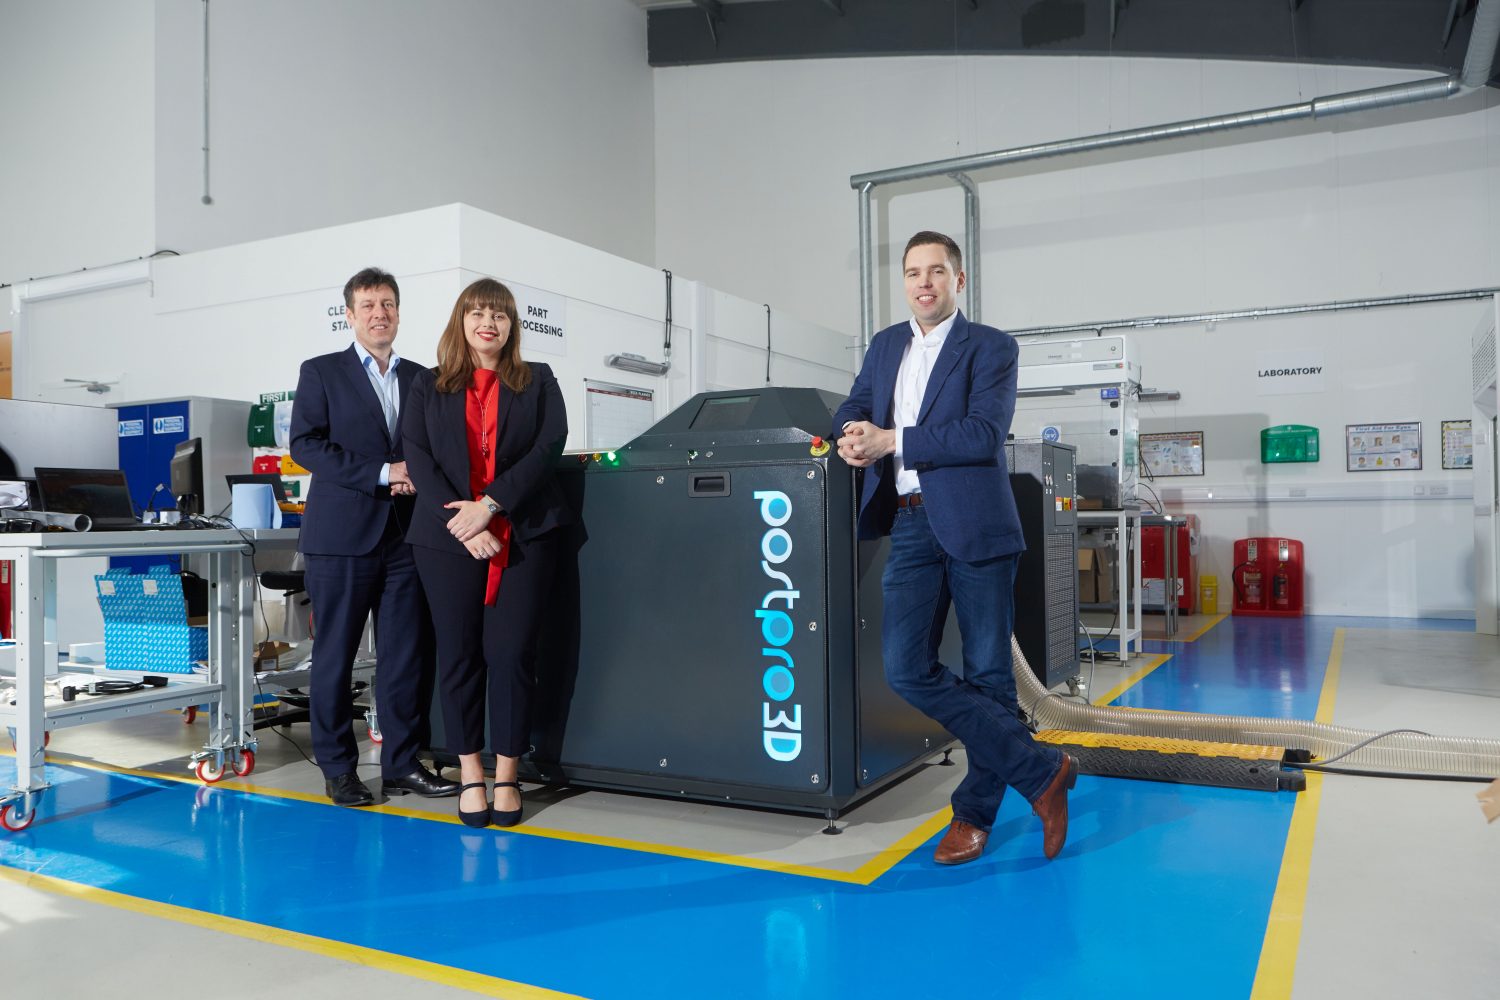 2 men and a woman from Additive Manufacturing Technologies stood next to a 3D printer